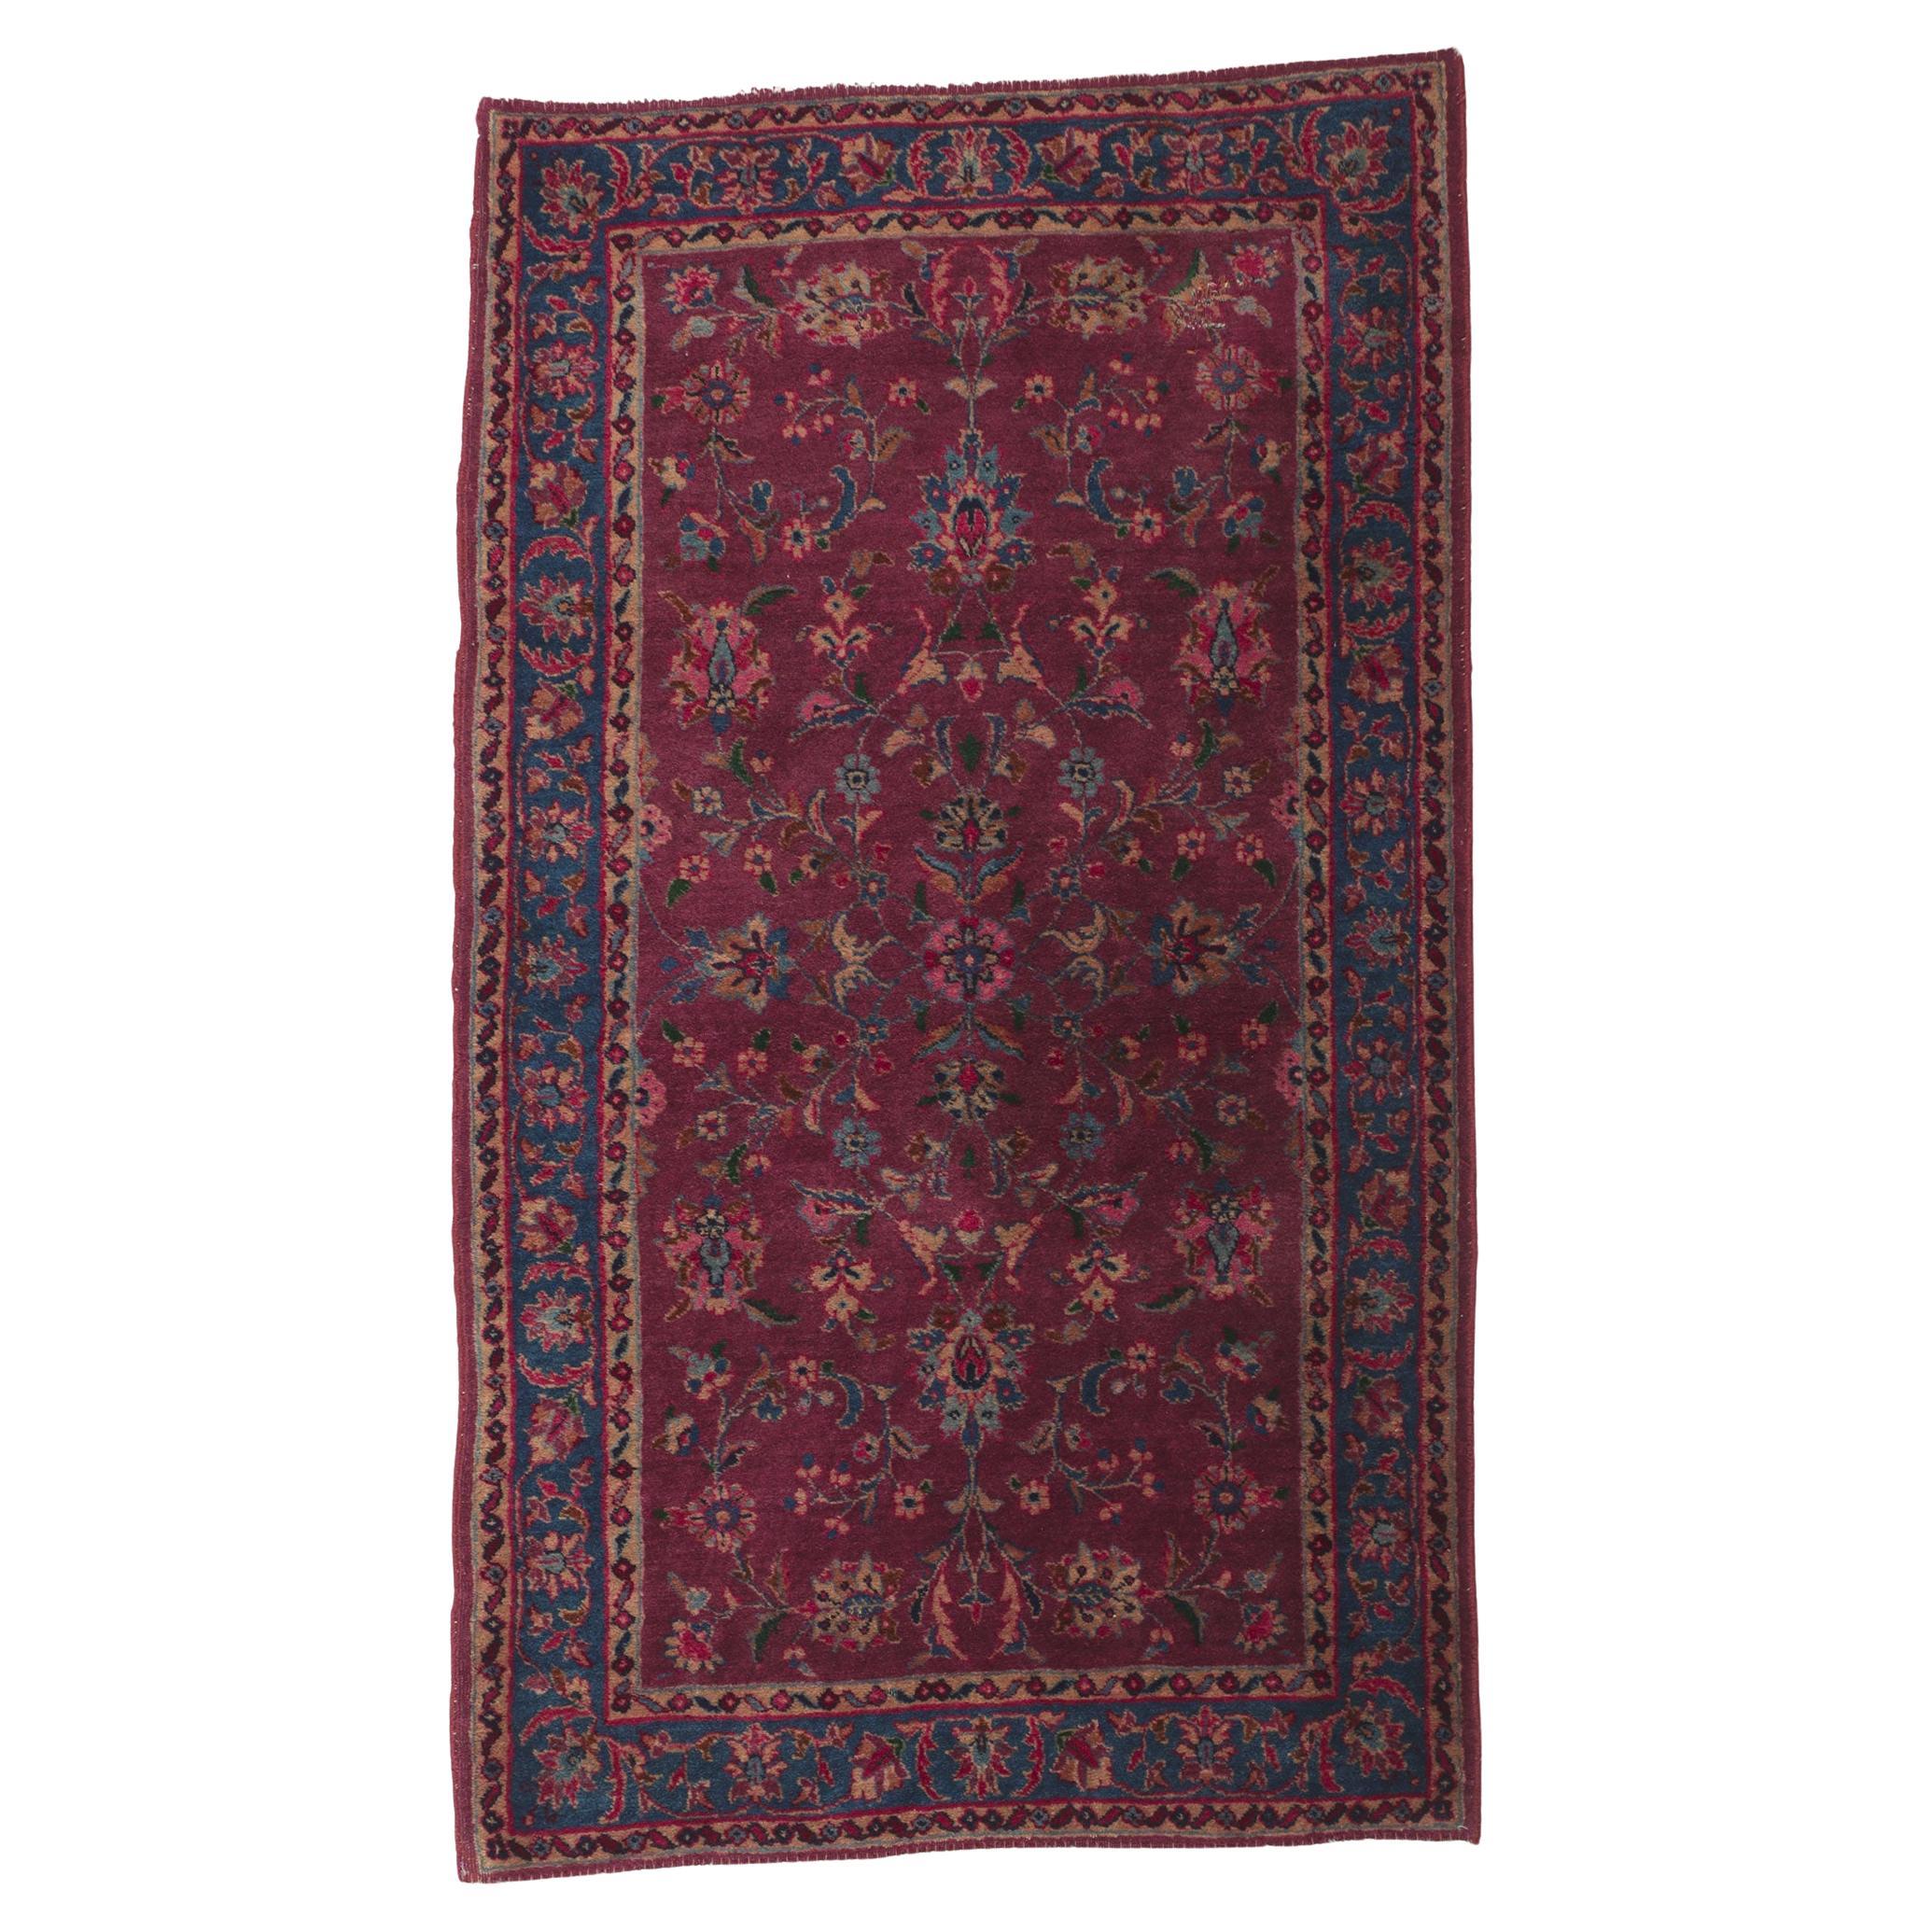 Antique Persian Yazd Accent Rug